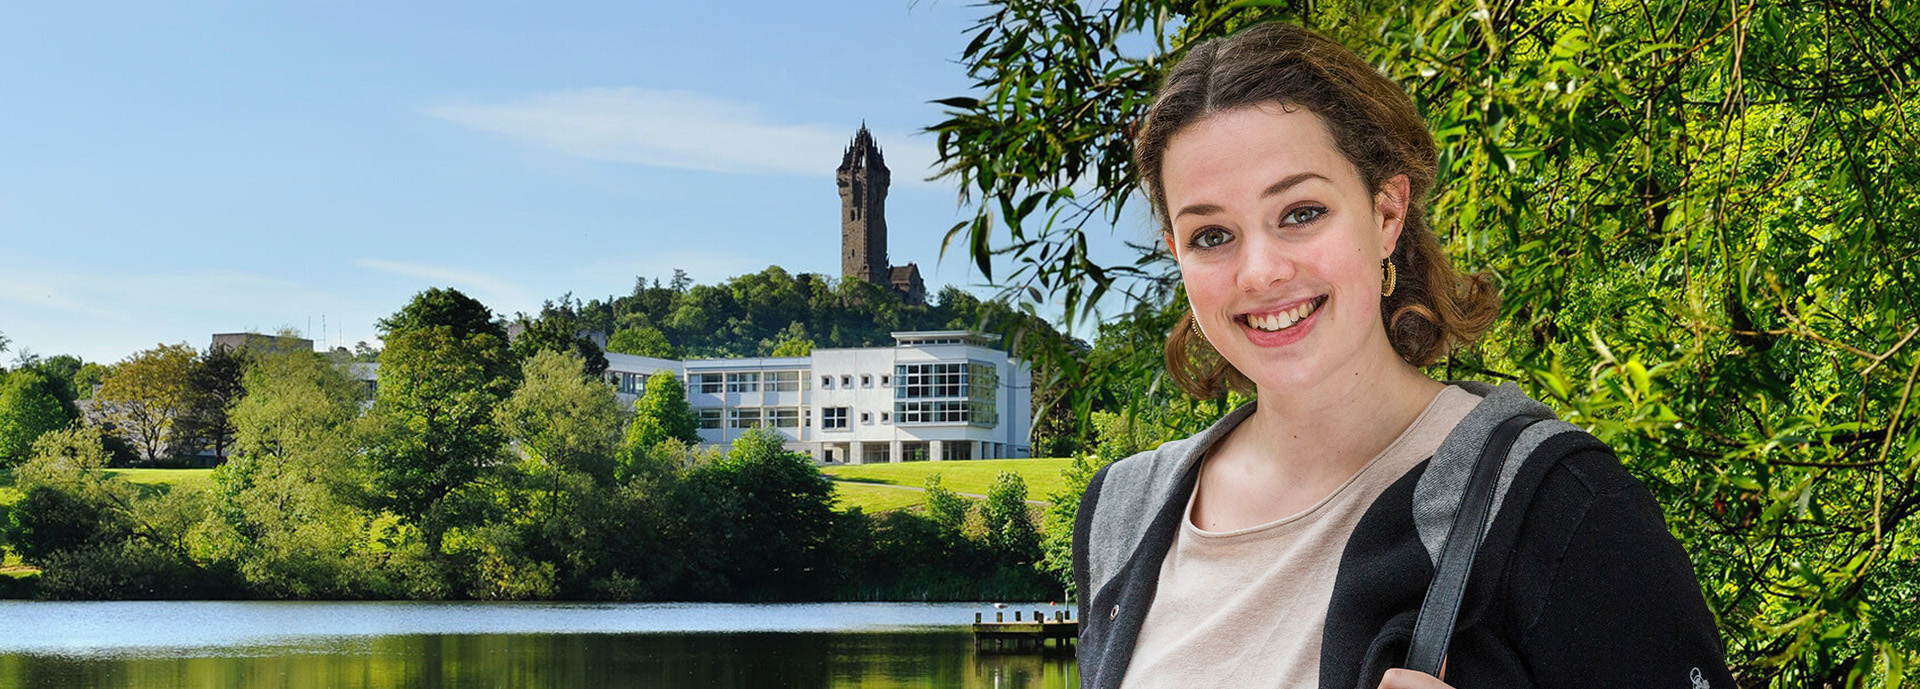 Student at University of Stirling